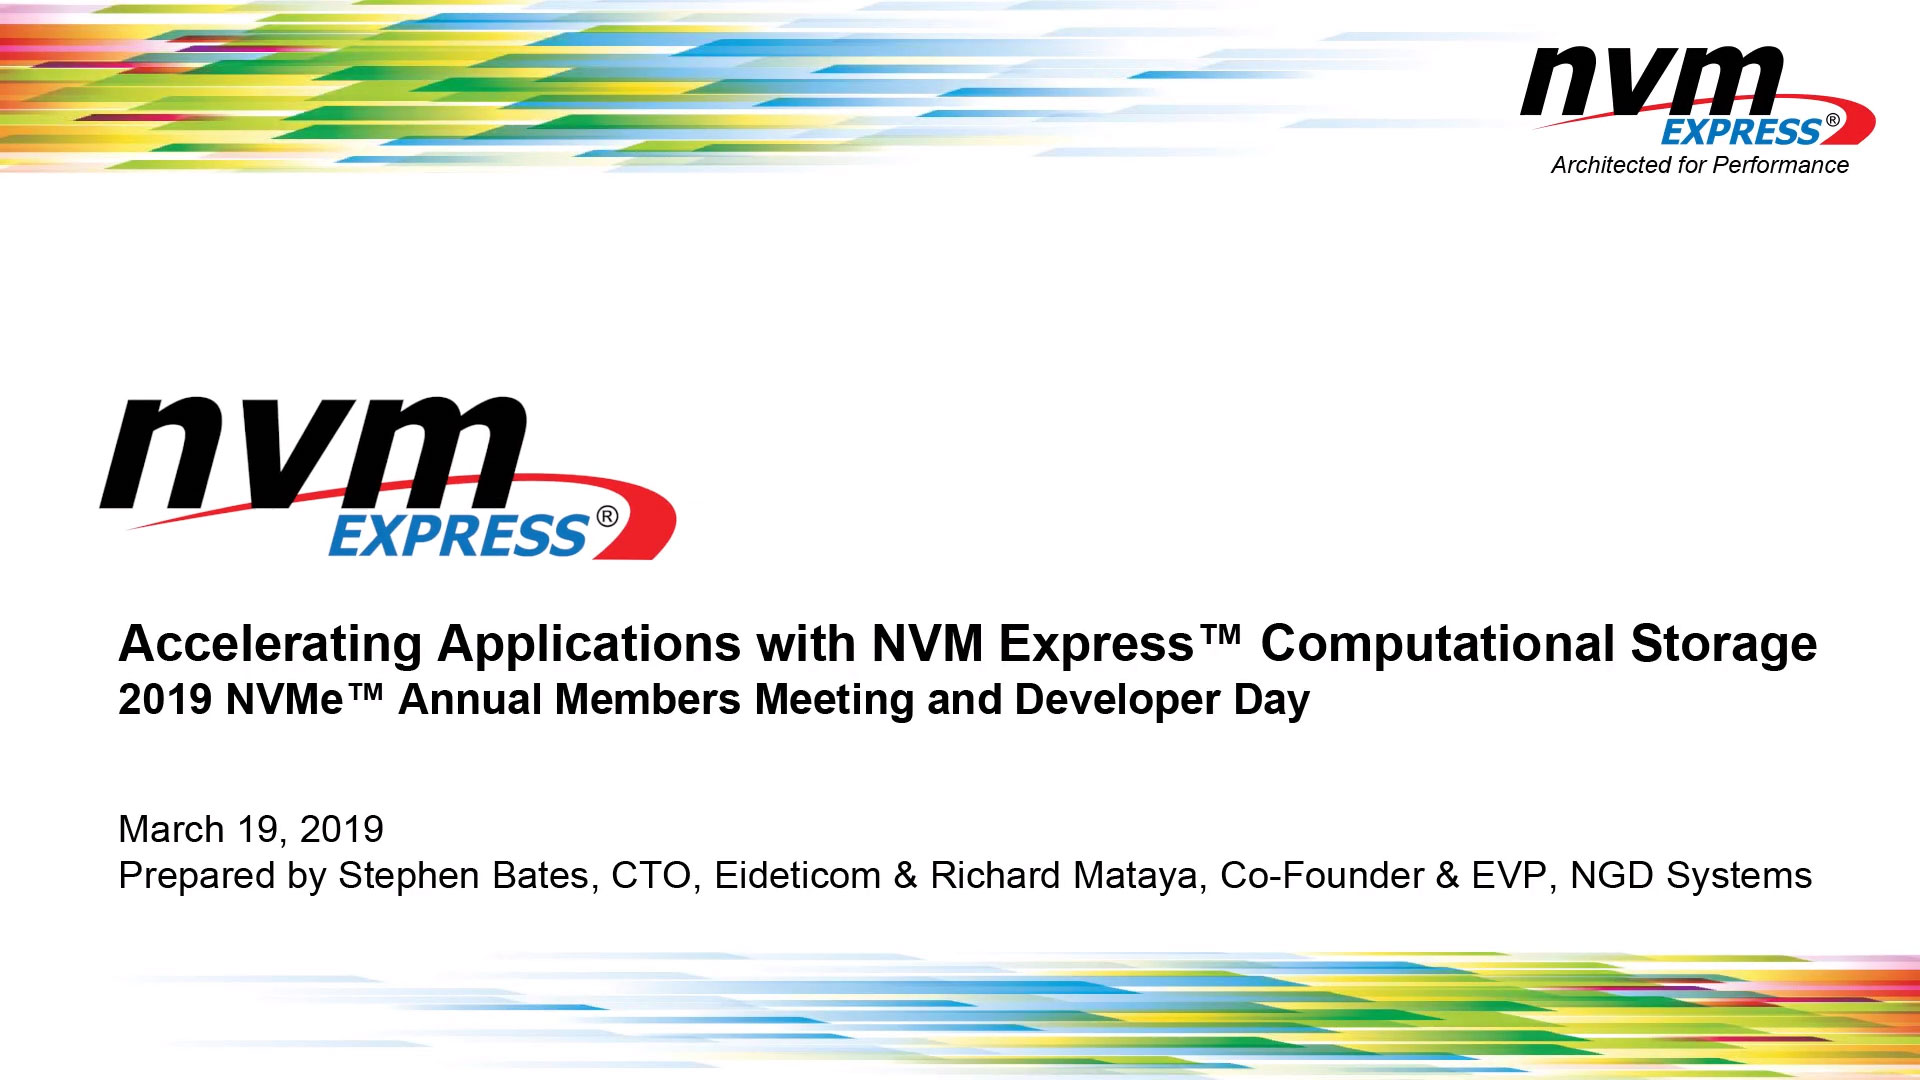 Accelerating Applications with NVM Express™ Computational Storage